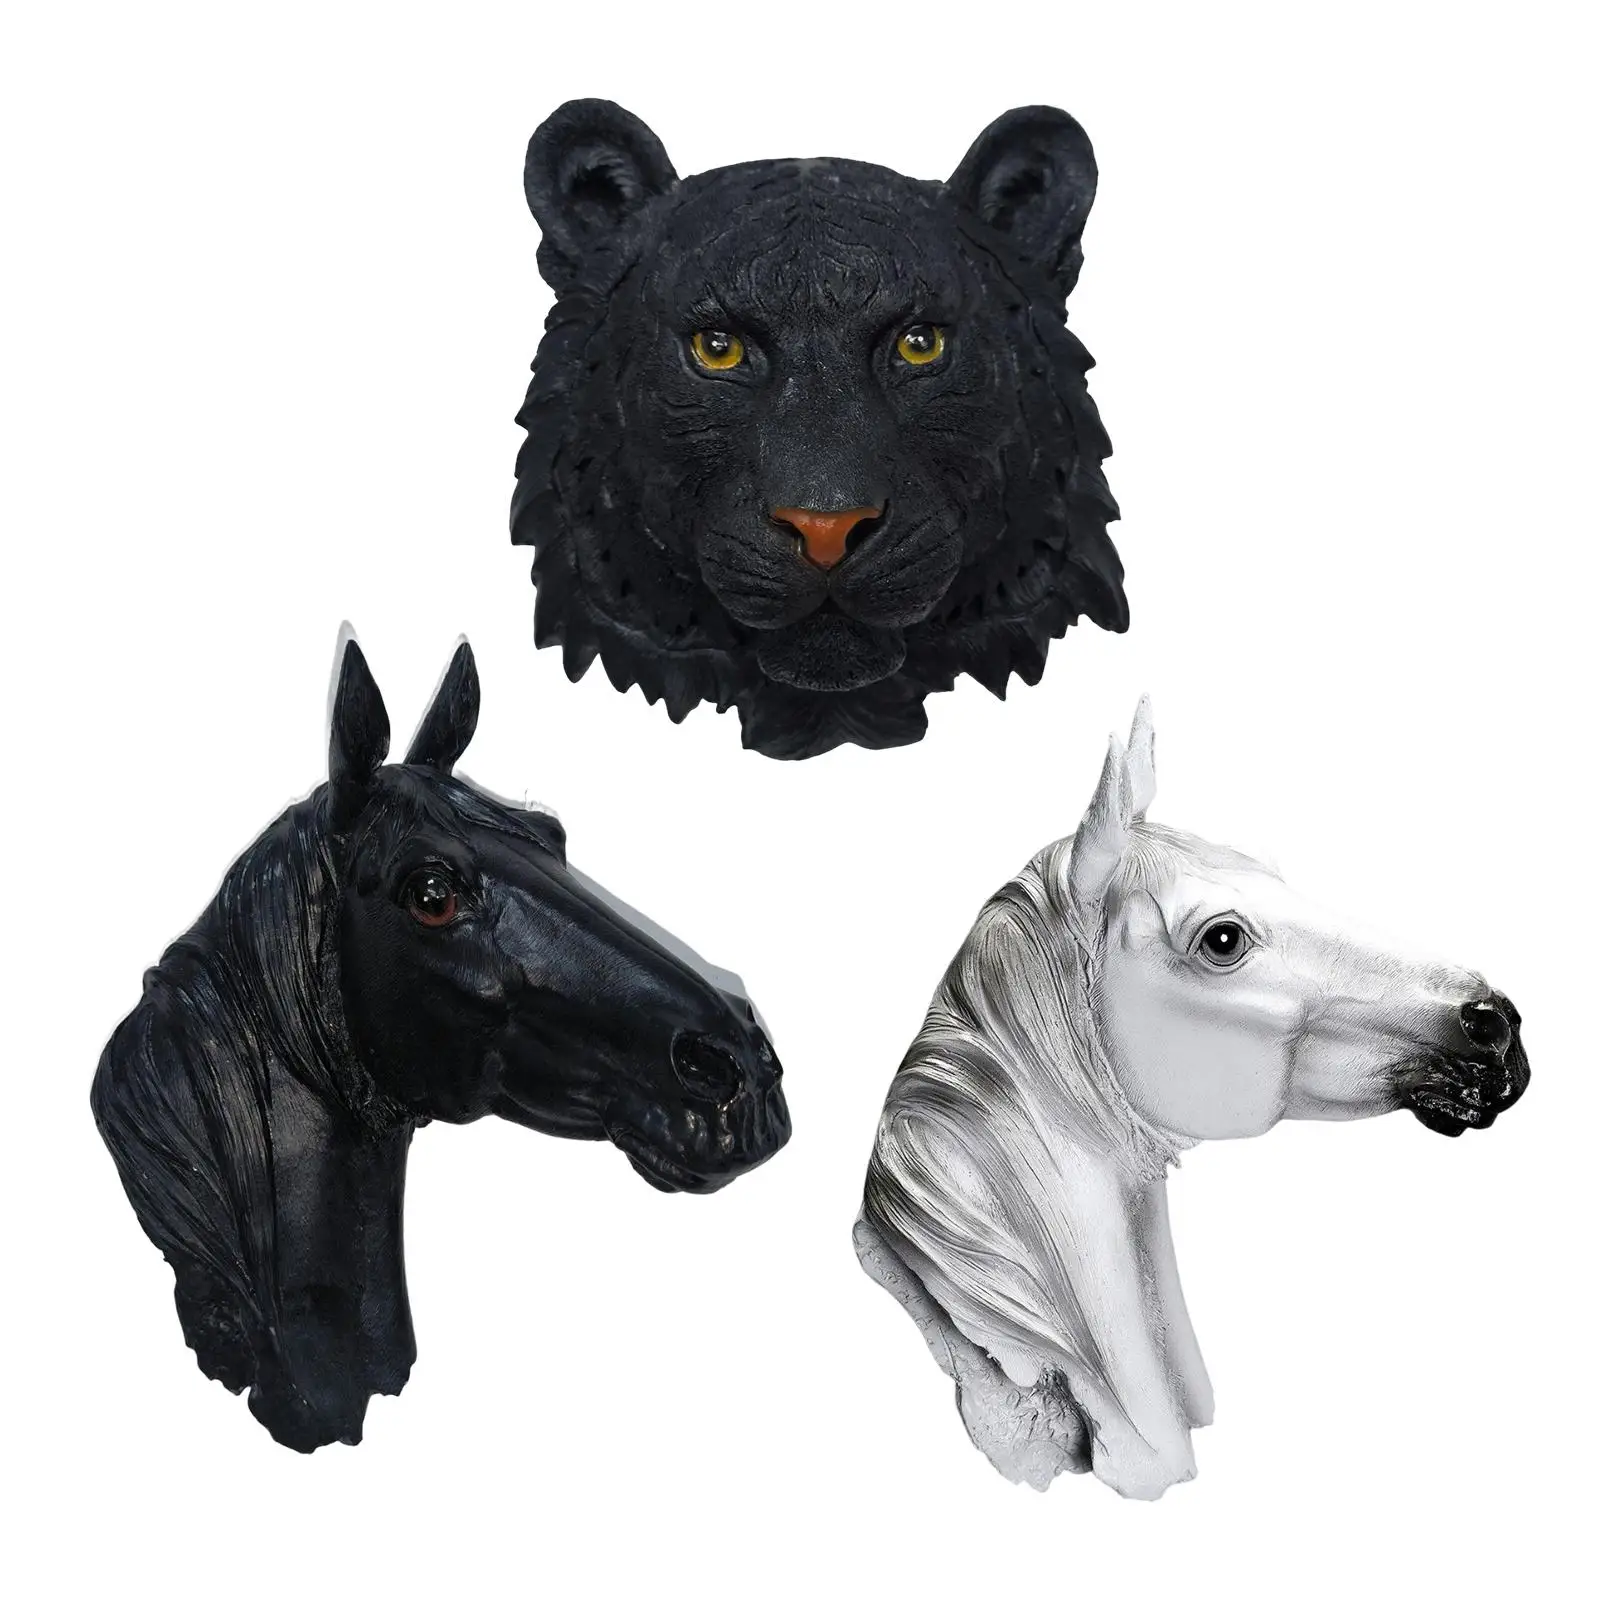 Animal Head Statue Sculpture Creative Realistic Artwork Ornament Crafts for Living Room Dining Room Bedroom Decor Collection